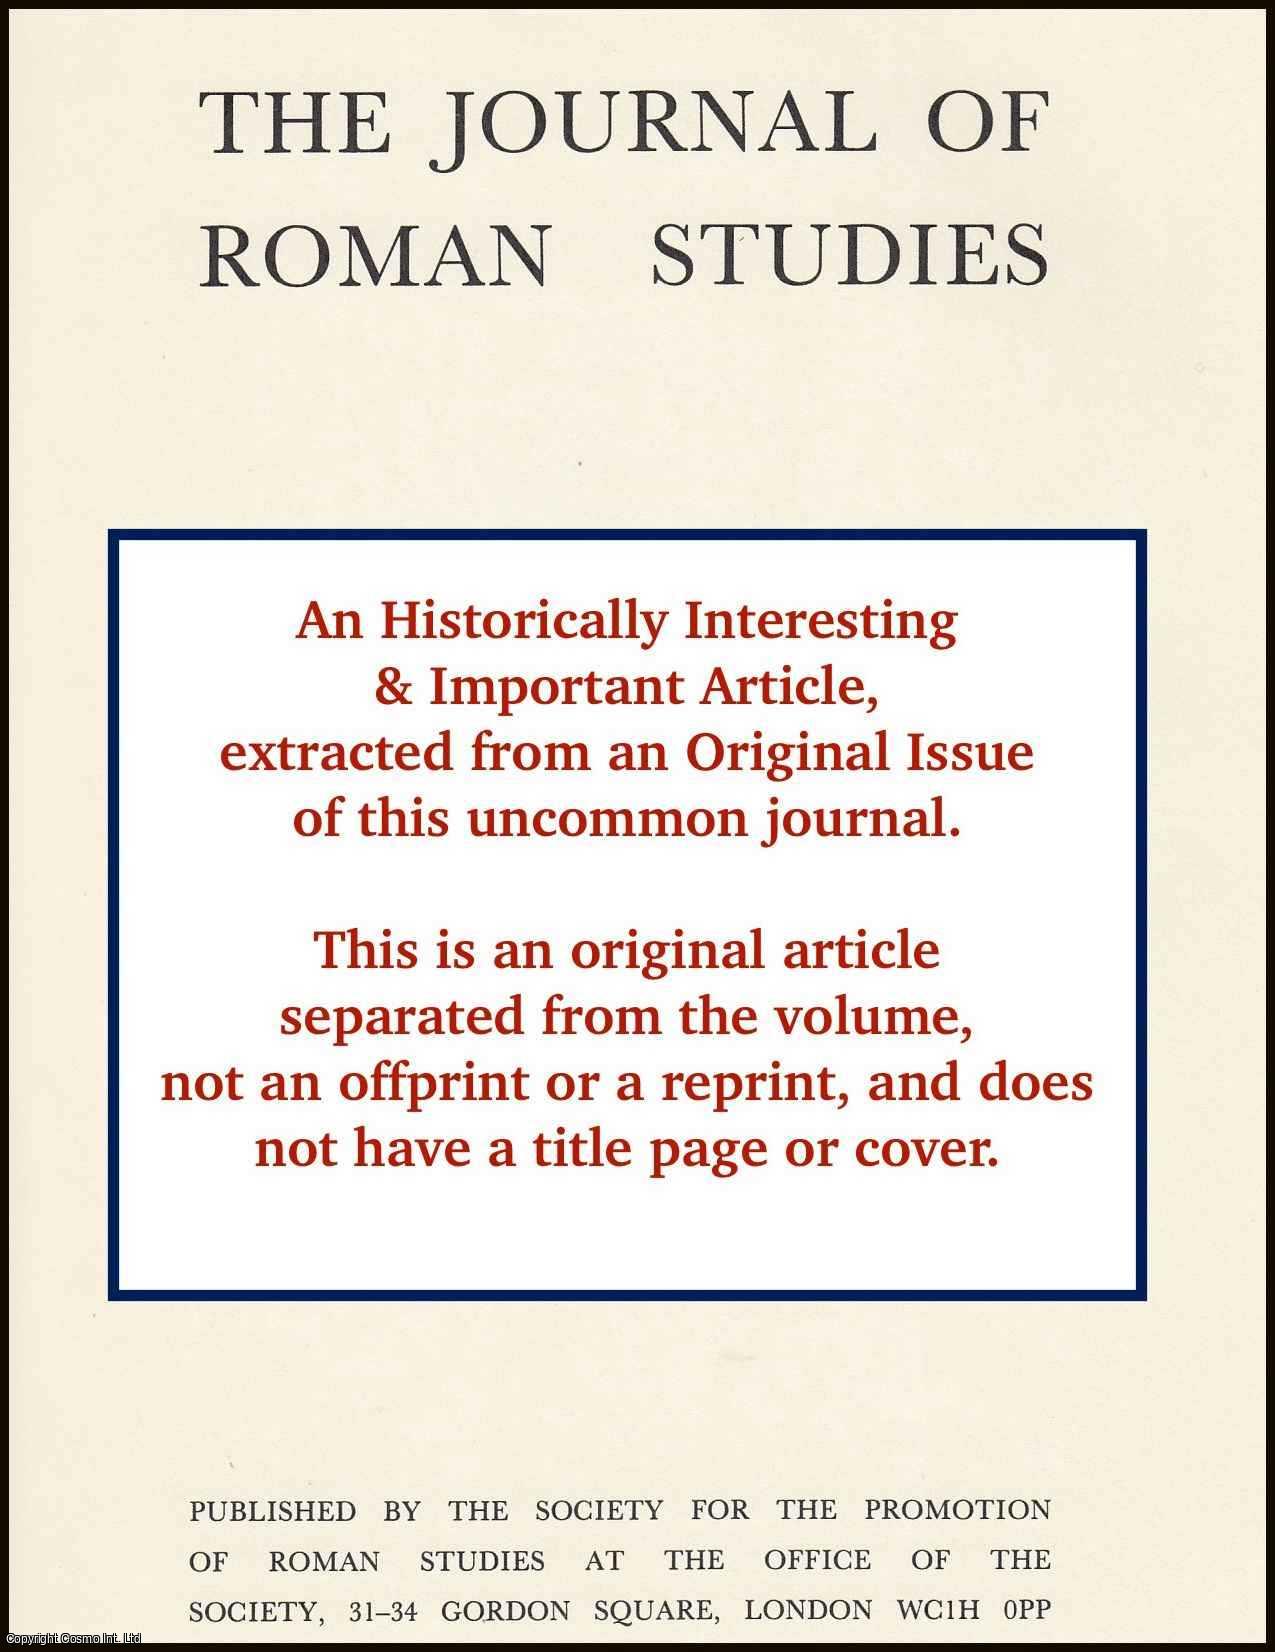 Joan M. Frayn - Wild and Cultivated Plants: a Note on the Peasant Economy of Roman Italy. An original article from the Journal of Roman Studies, 1975.